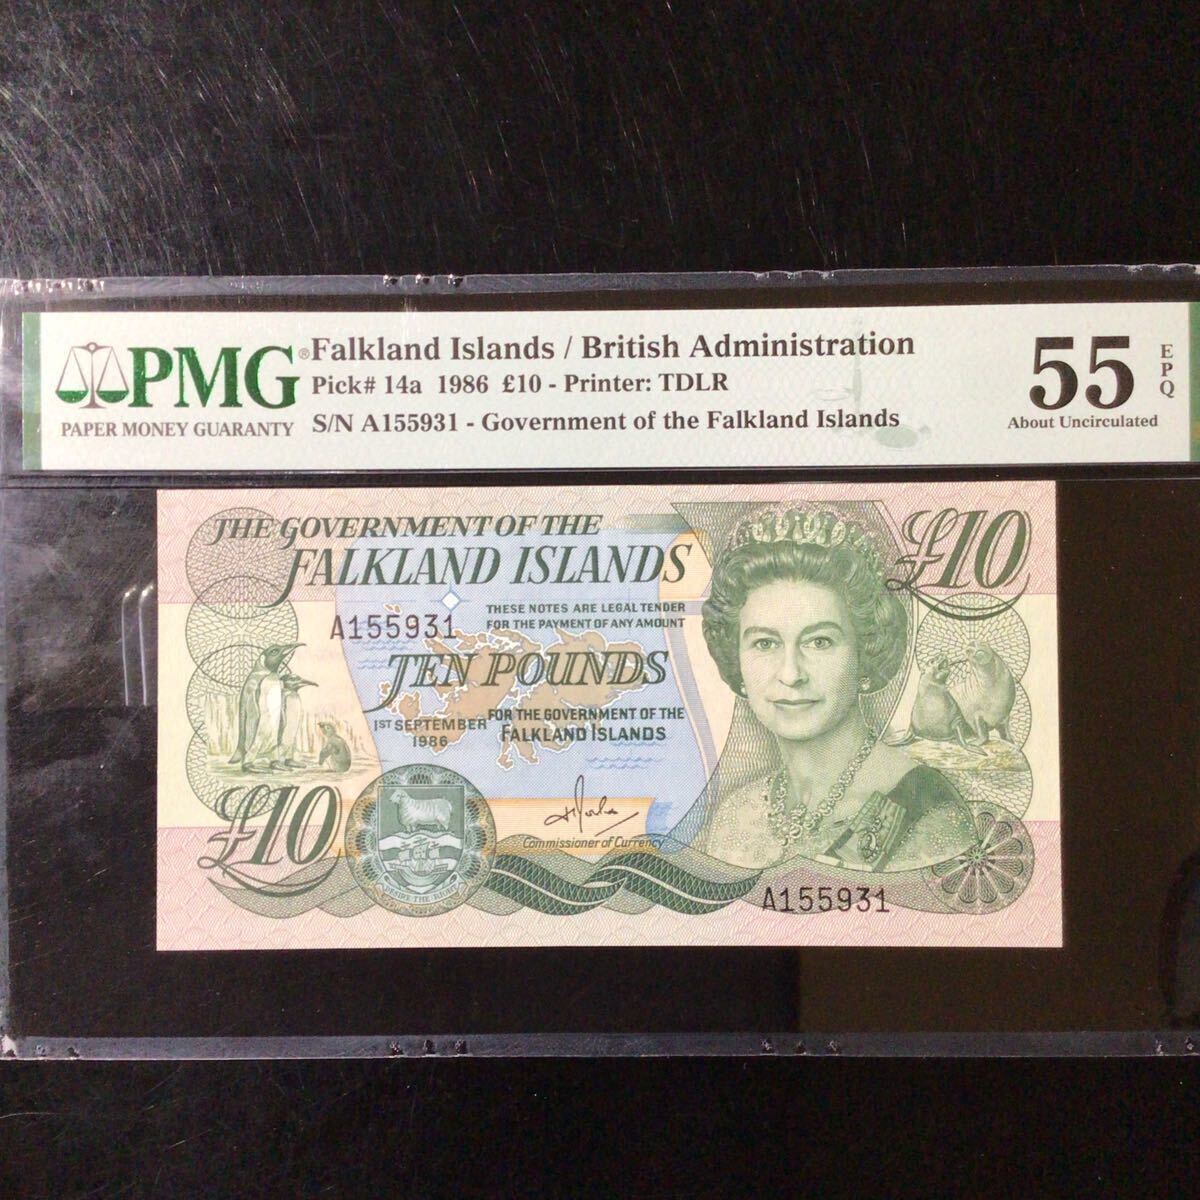 World Banknote Grading FALKLAND ISLANDS《 British Administration 》10 Pounds【1986】『PMG Grading About Uncirculated 55 EPQ』_画像1